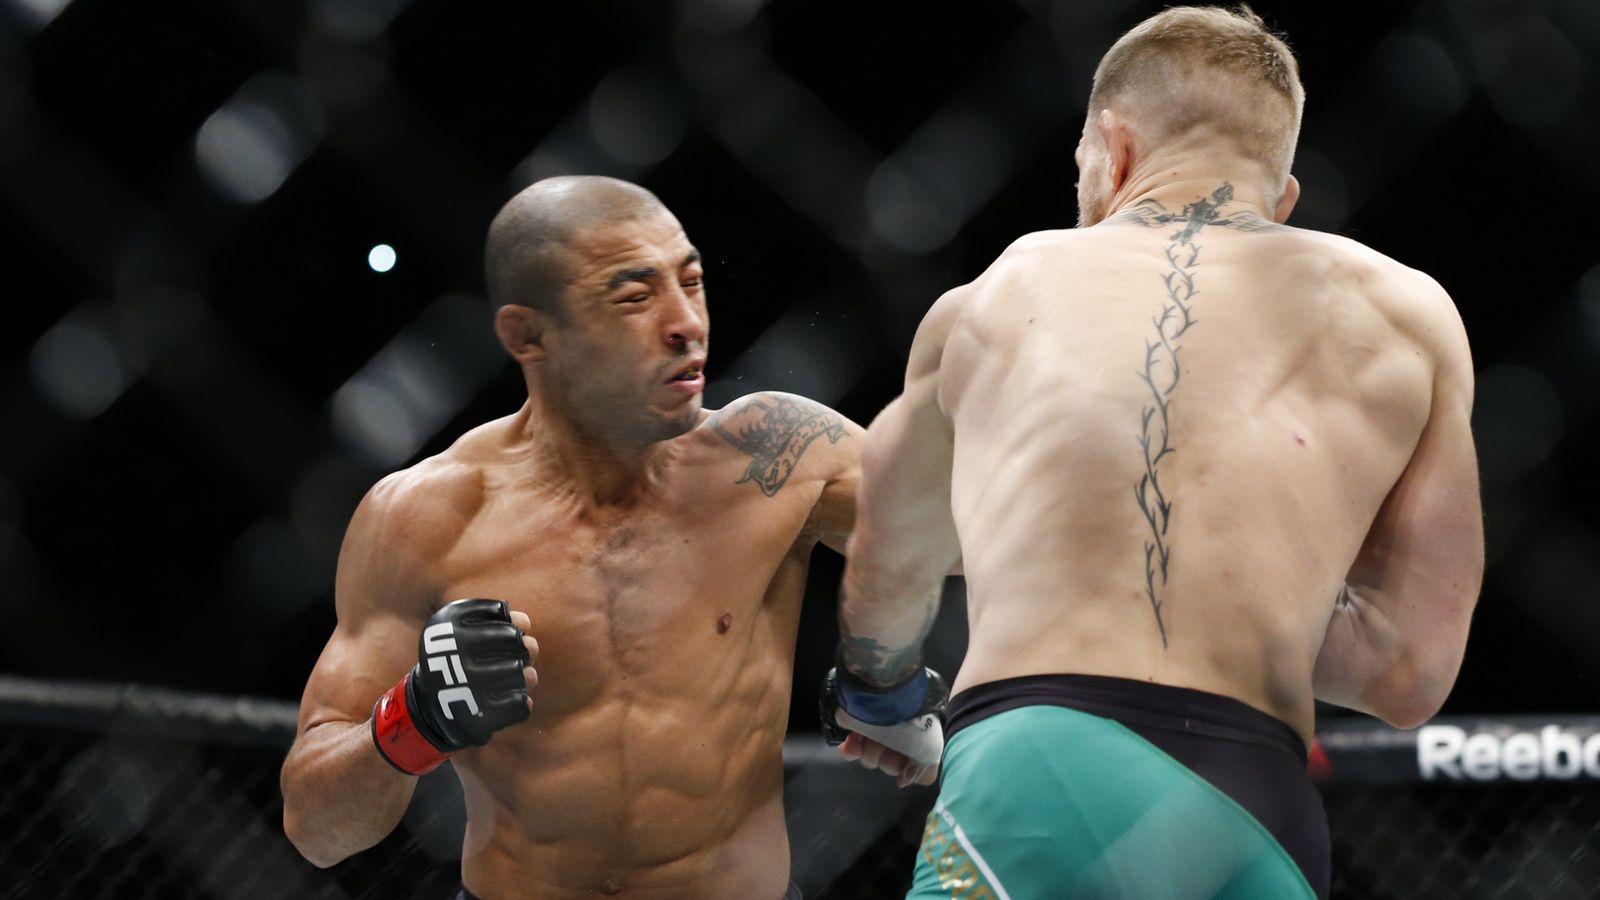 Jose Aldo Can't Sue The UFC, Is Forced To Fight Out His Contract